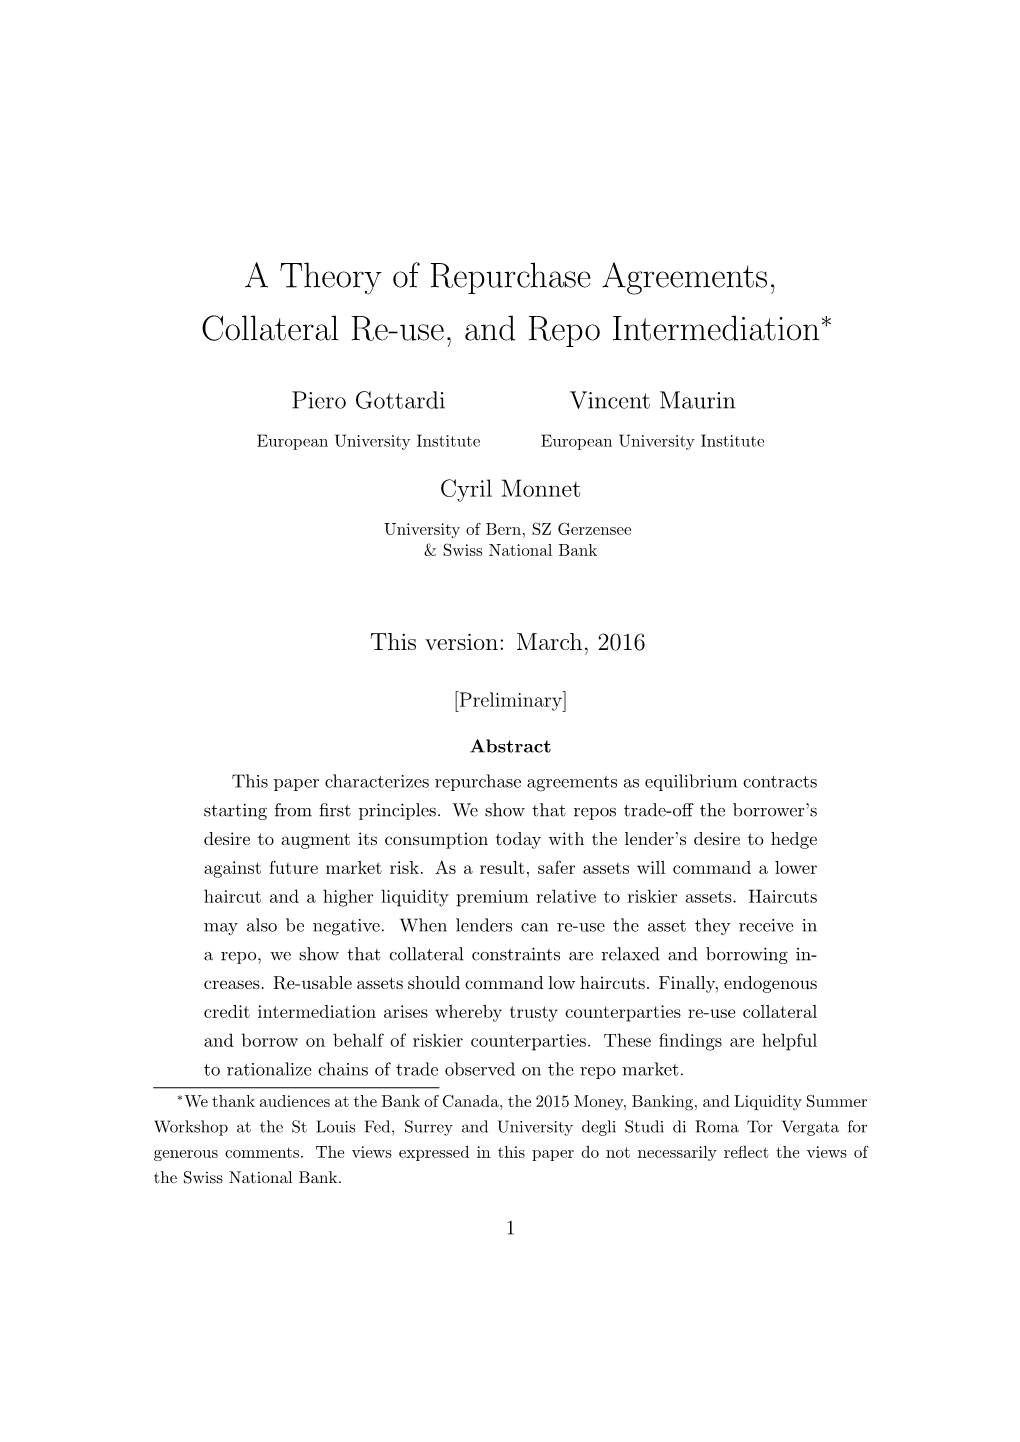 A Theory of Repurchase Agreements, Collateral